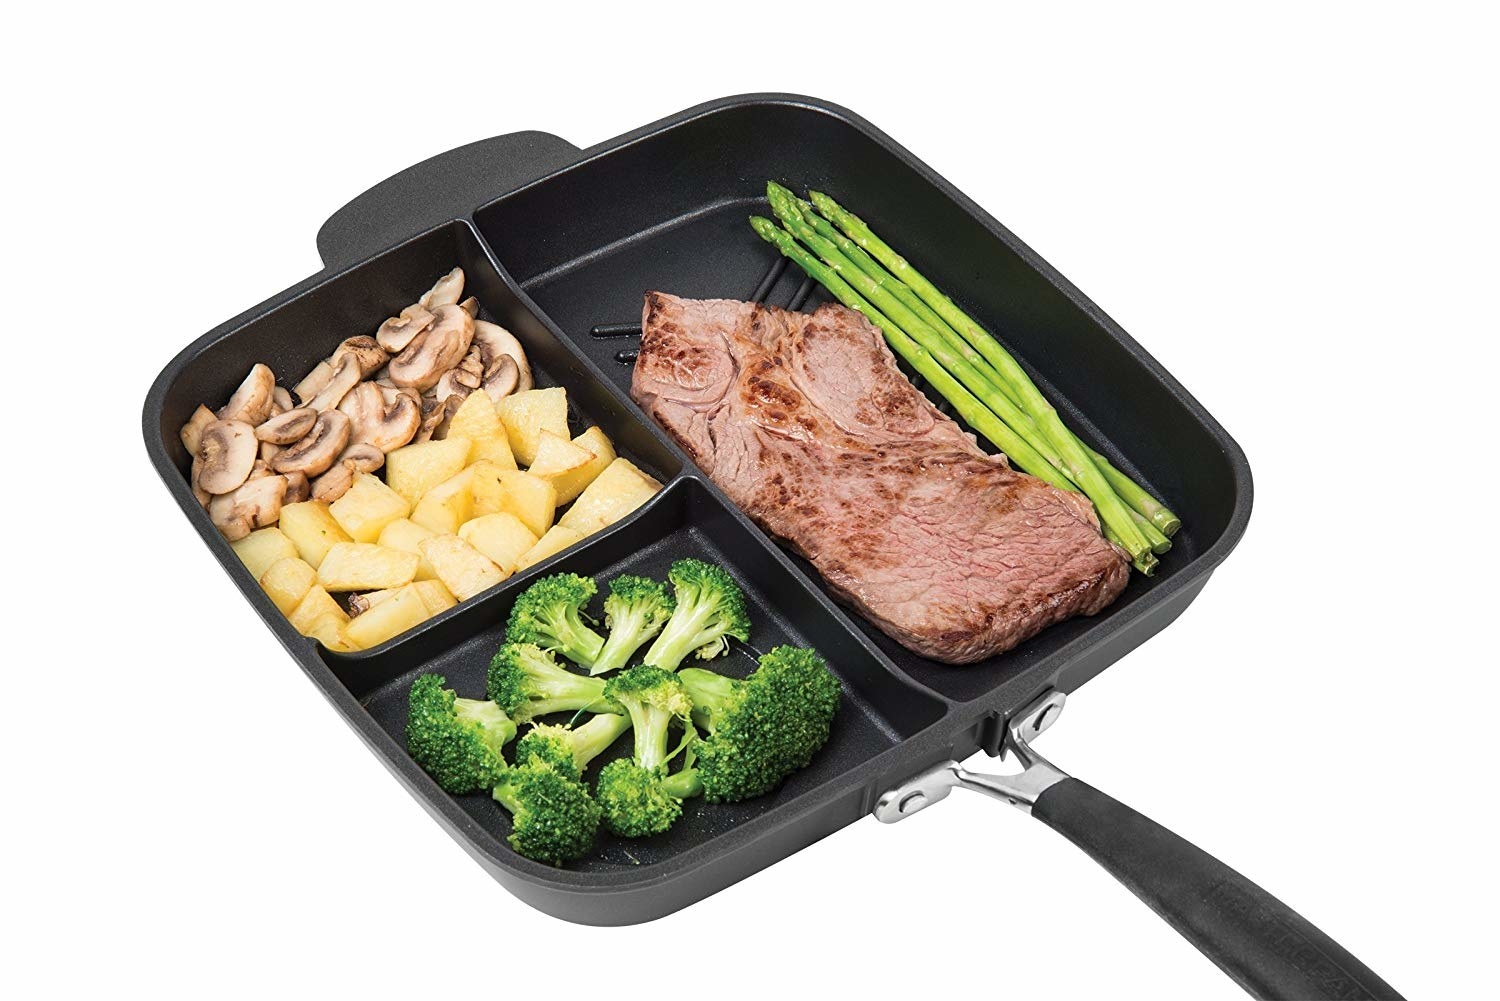 rectangular skillet with one larger 1/2 side and two smaller 1/4 compartments on the other side